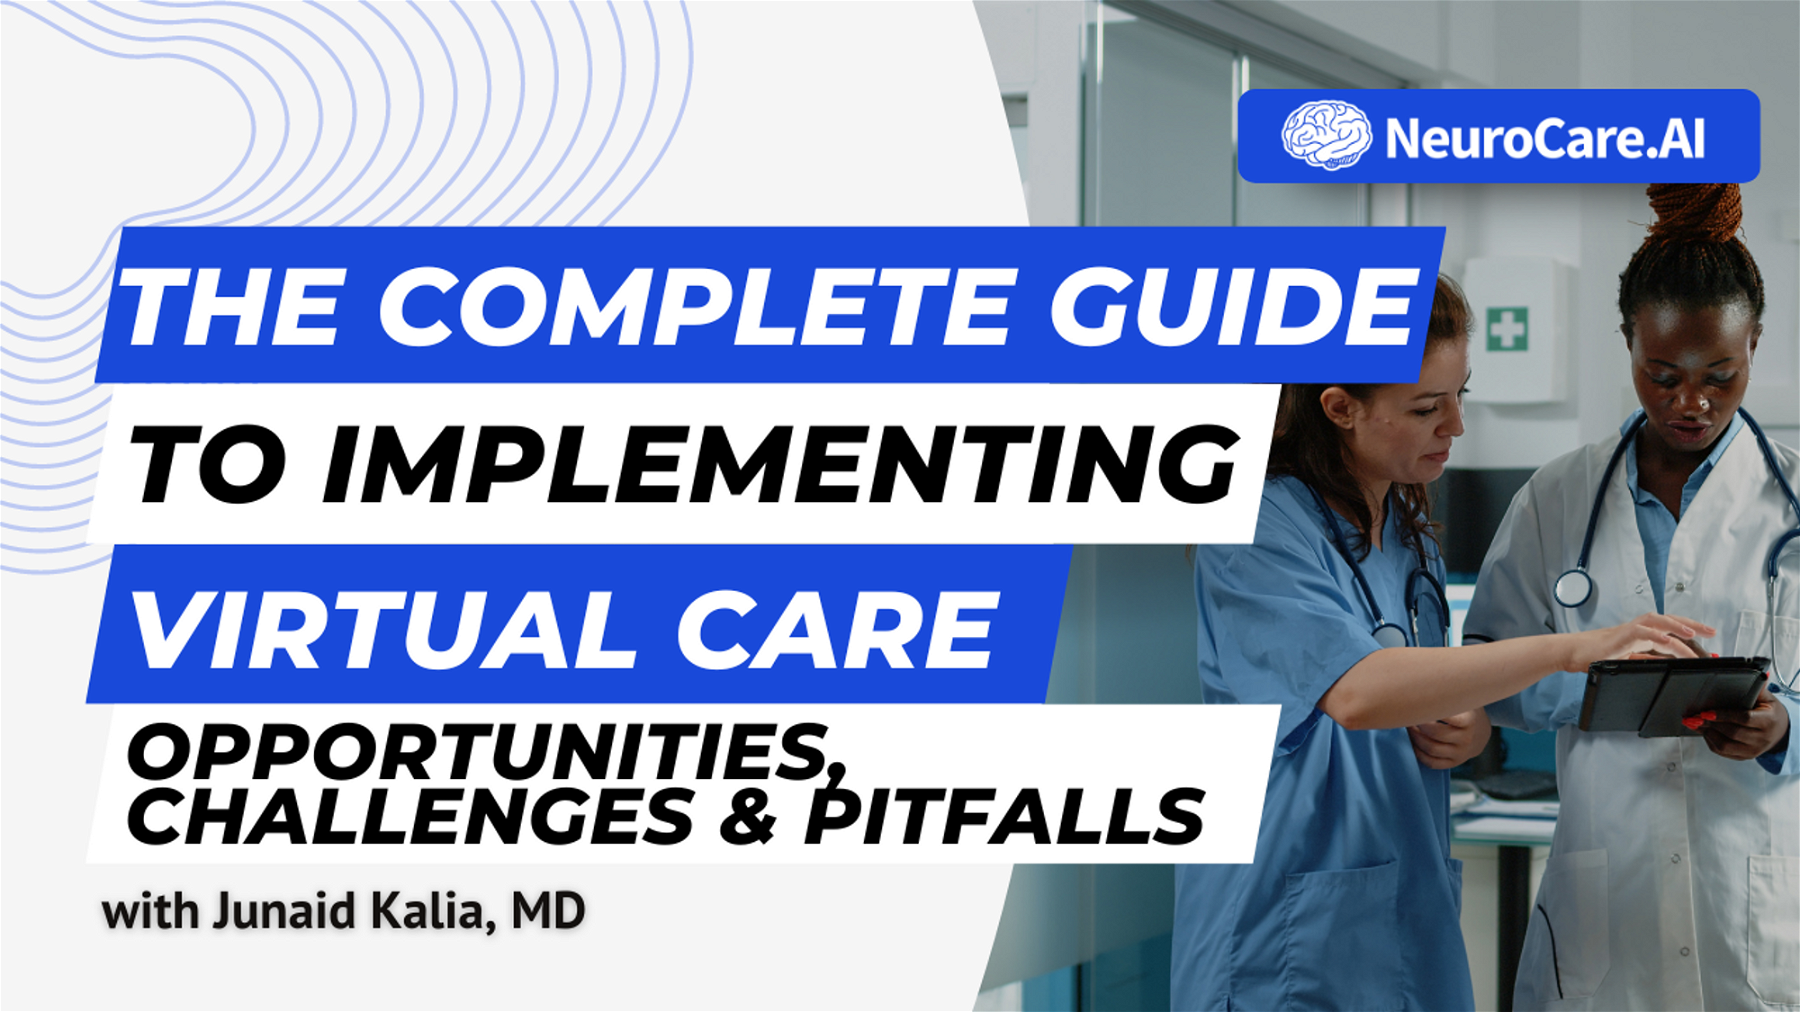 The Complete Guide to Implementing Virtual Care Opportunities, Challenges, and Pitfalls